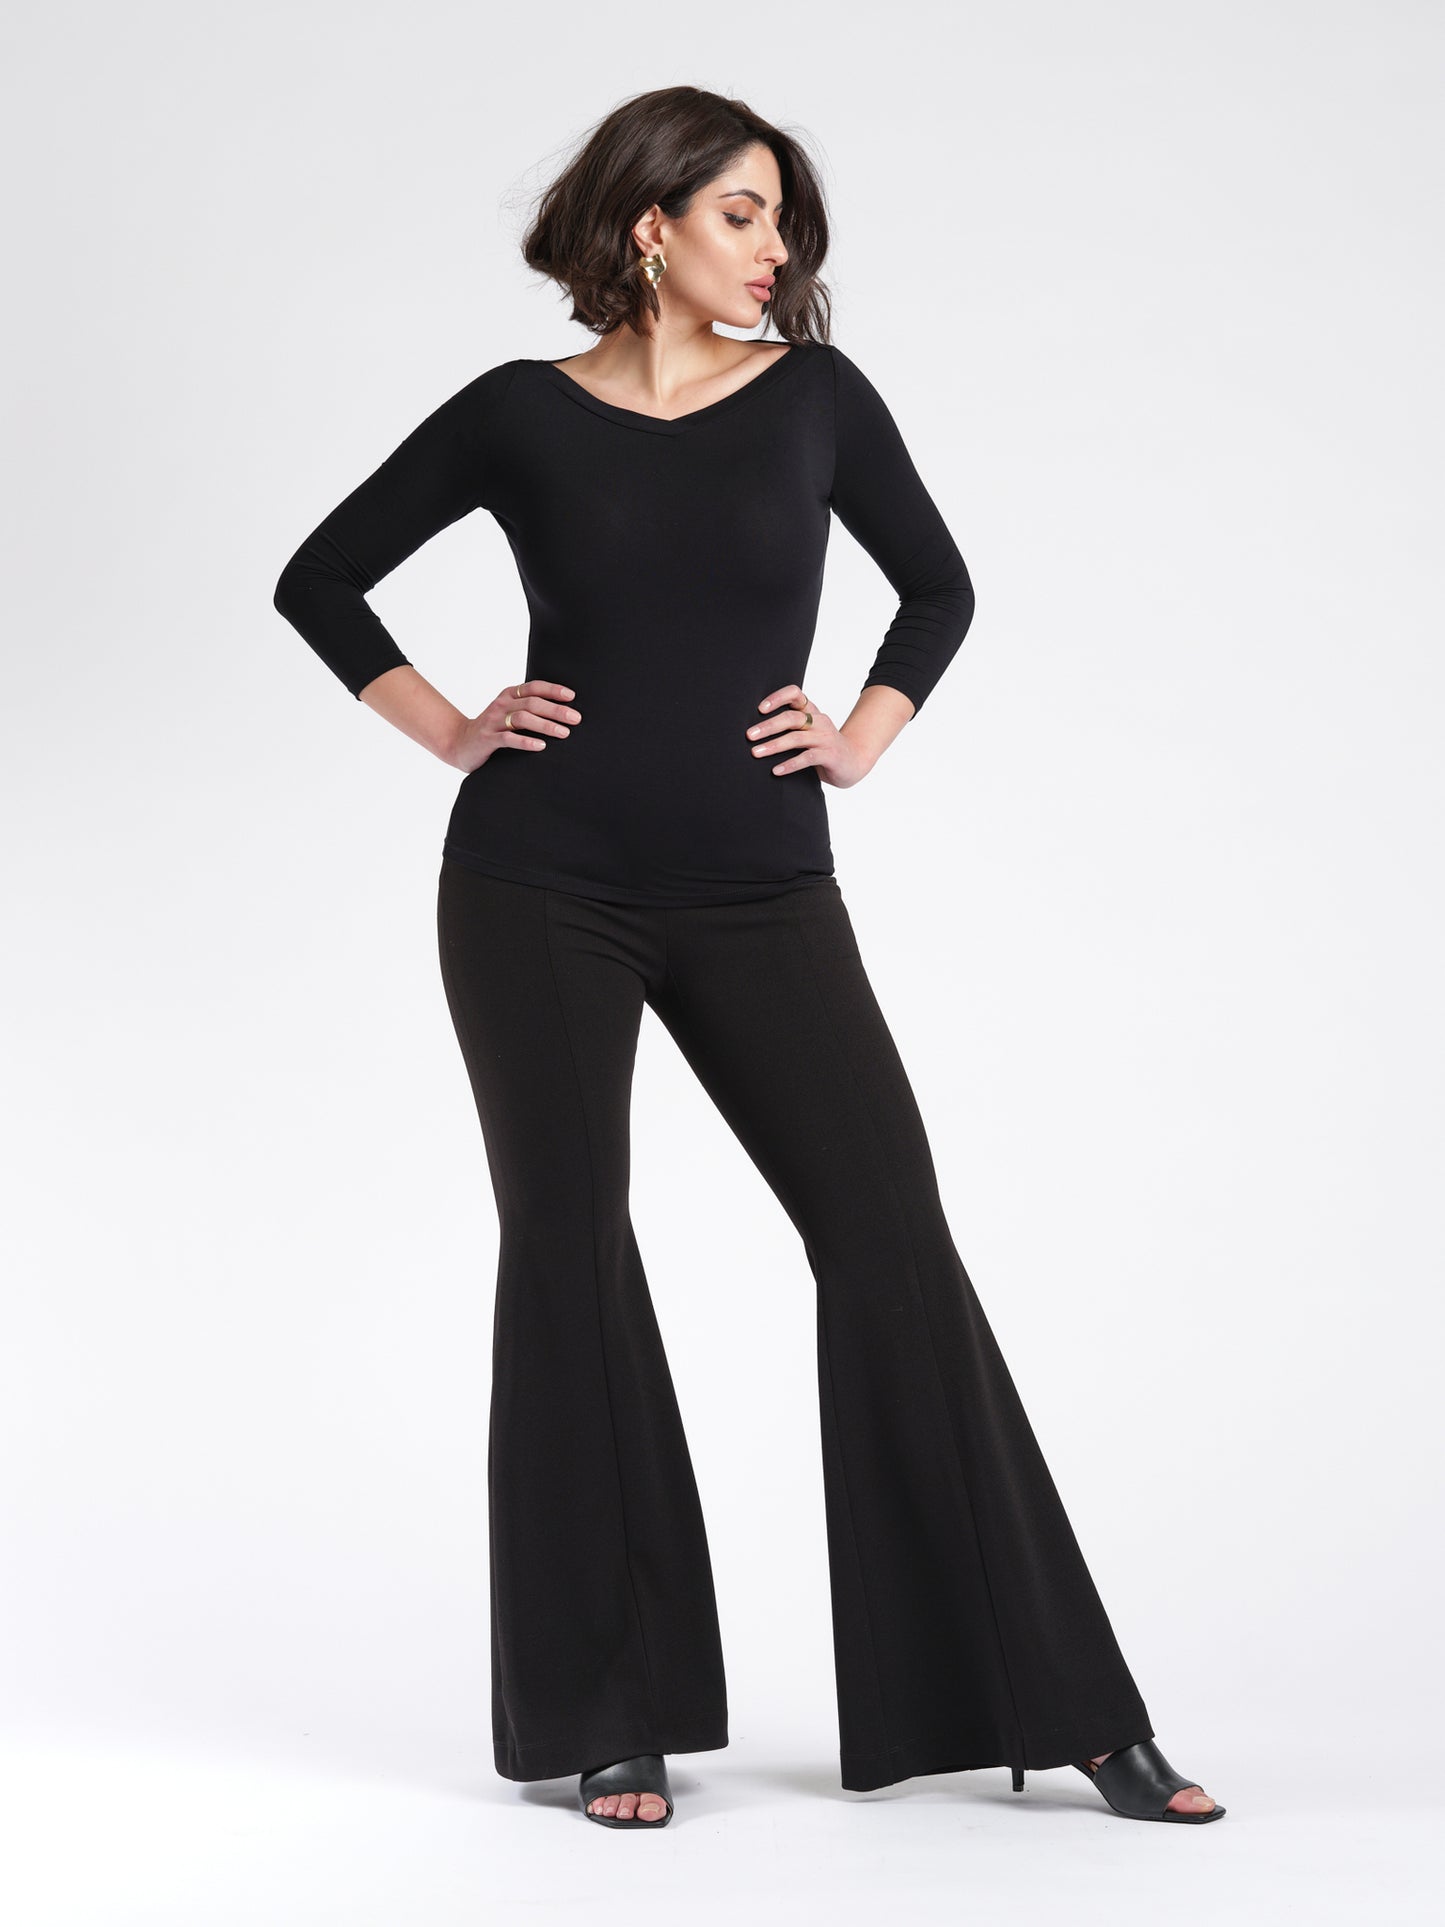 Woman wearing a black 3/4 length sleeve fuller bust bamboo pullover with stylized boatneck paired with bell bottom pants by Miriam Baker.